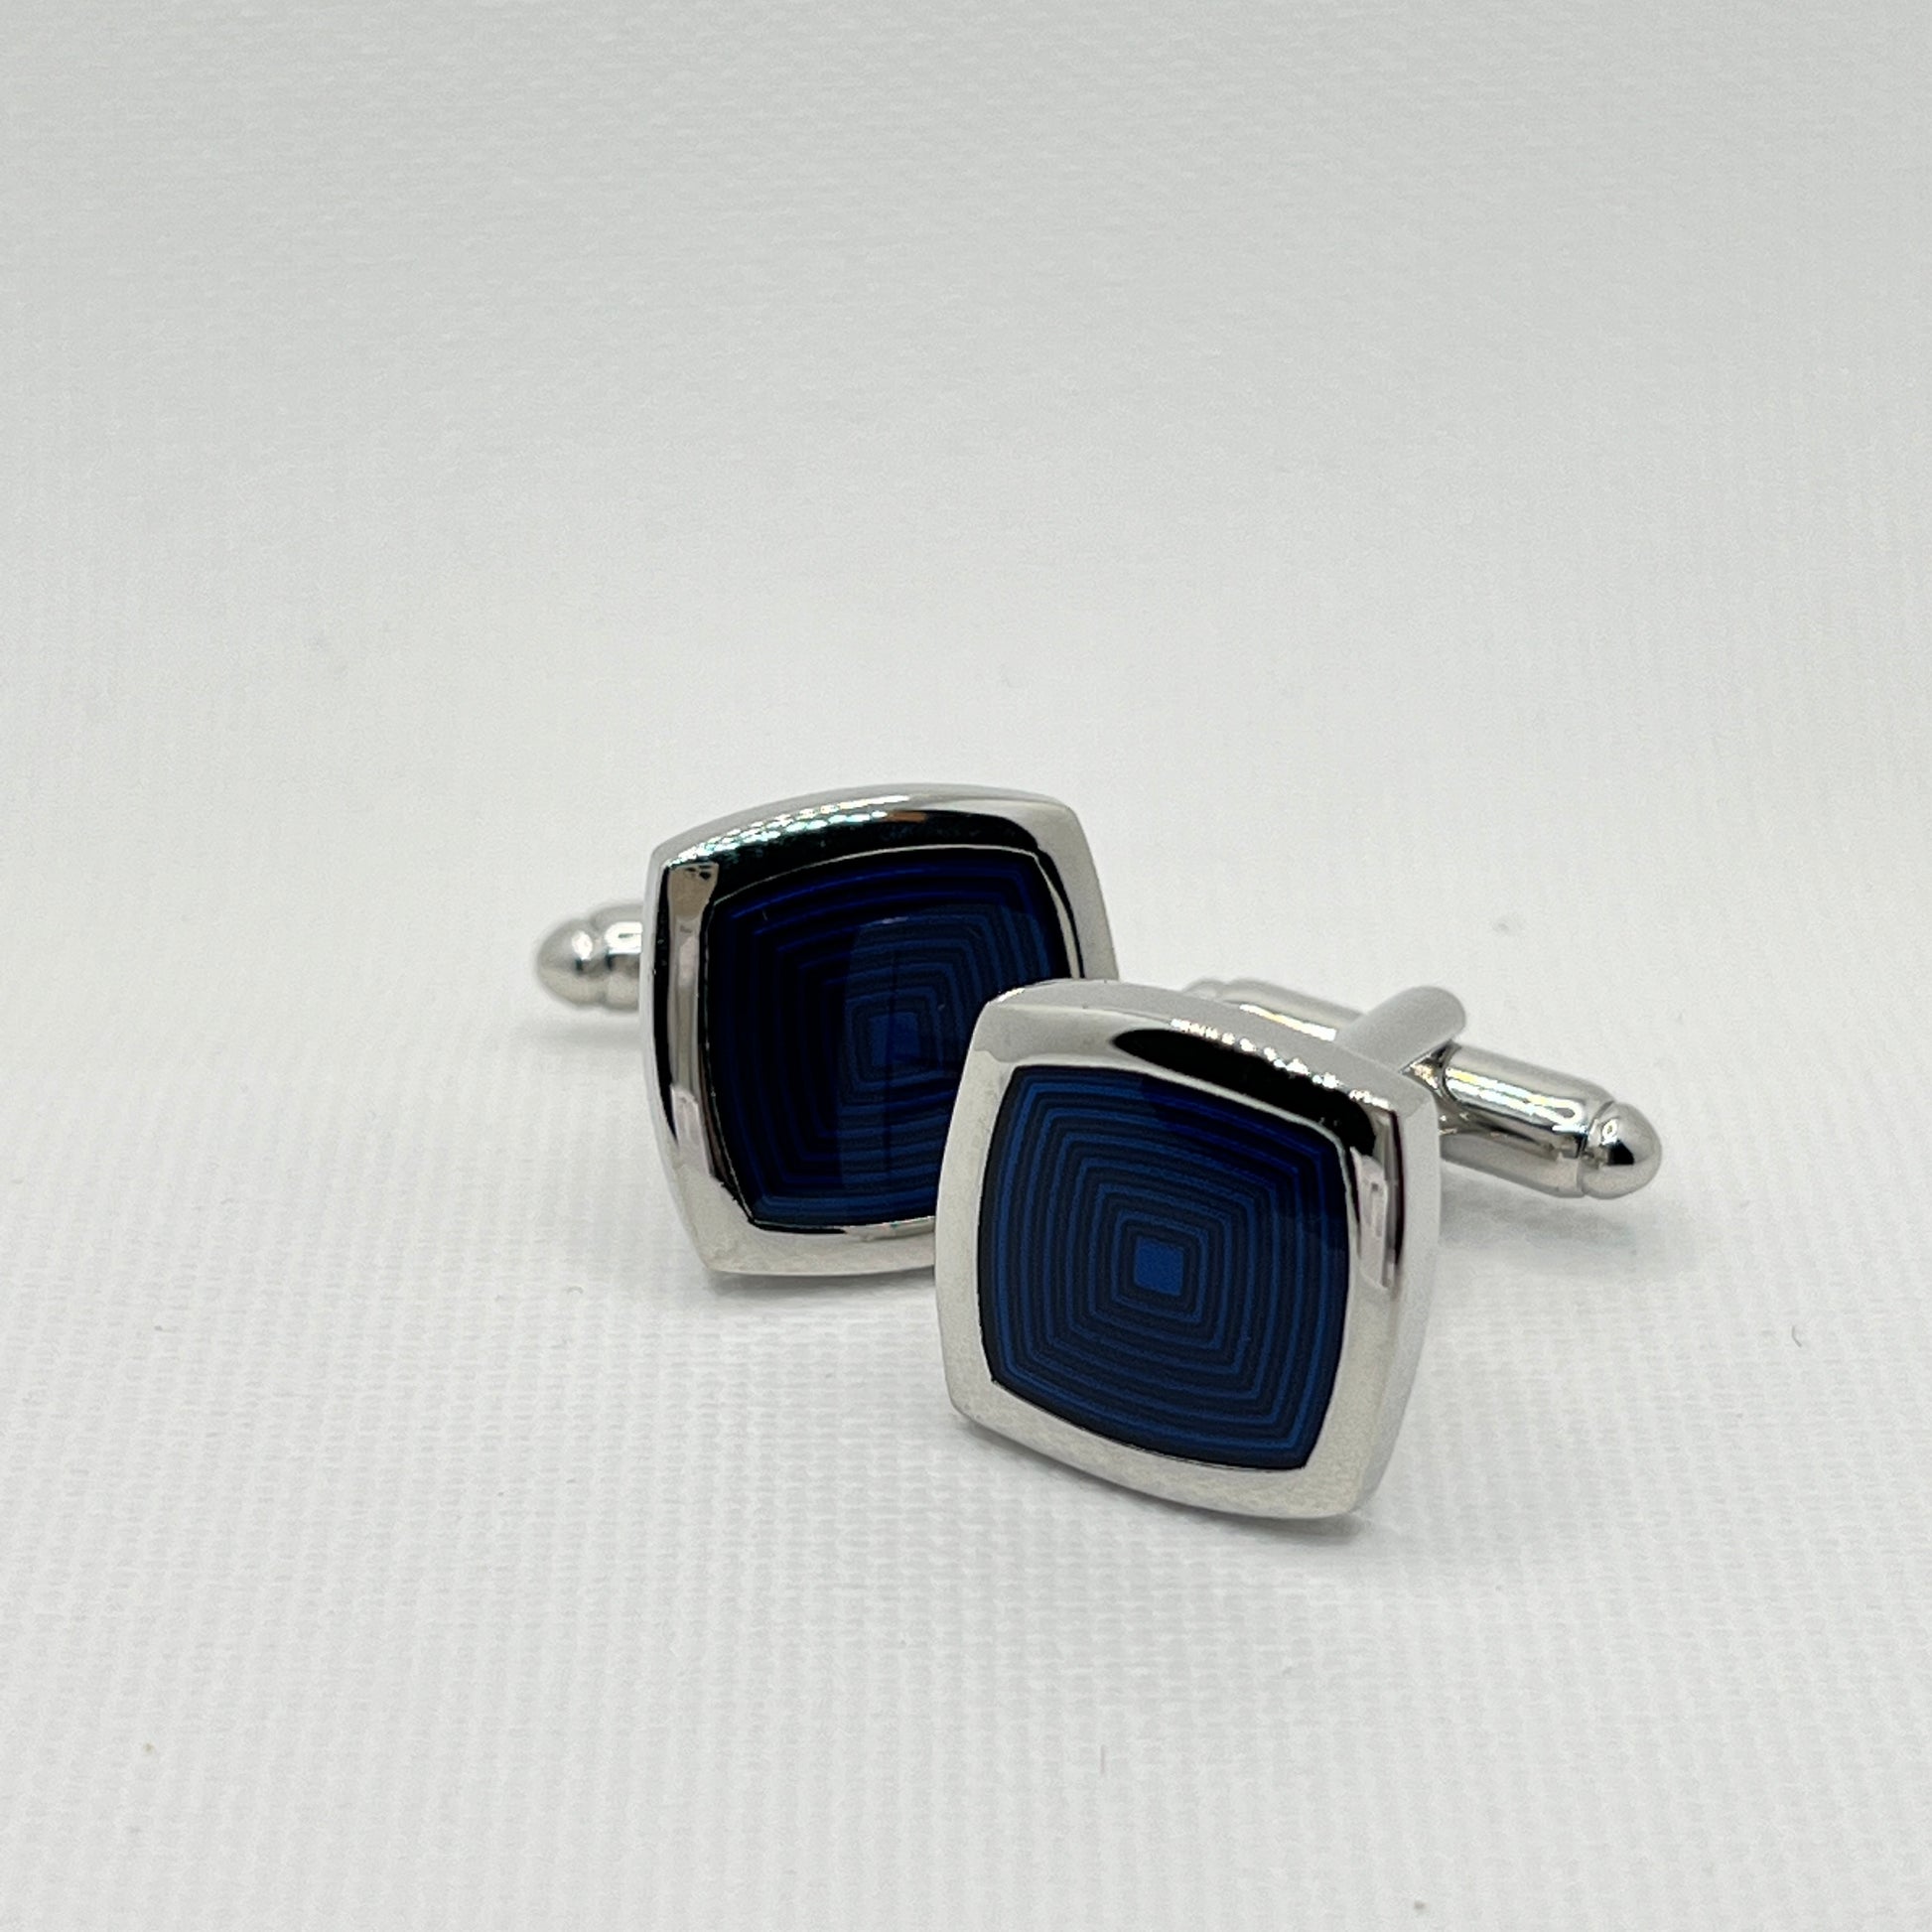 Tasker & Shaw | Luxury Menswear | Silver antique style square cufflinks with blue geometric inlay